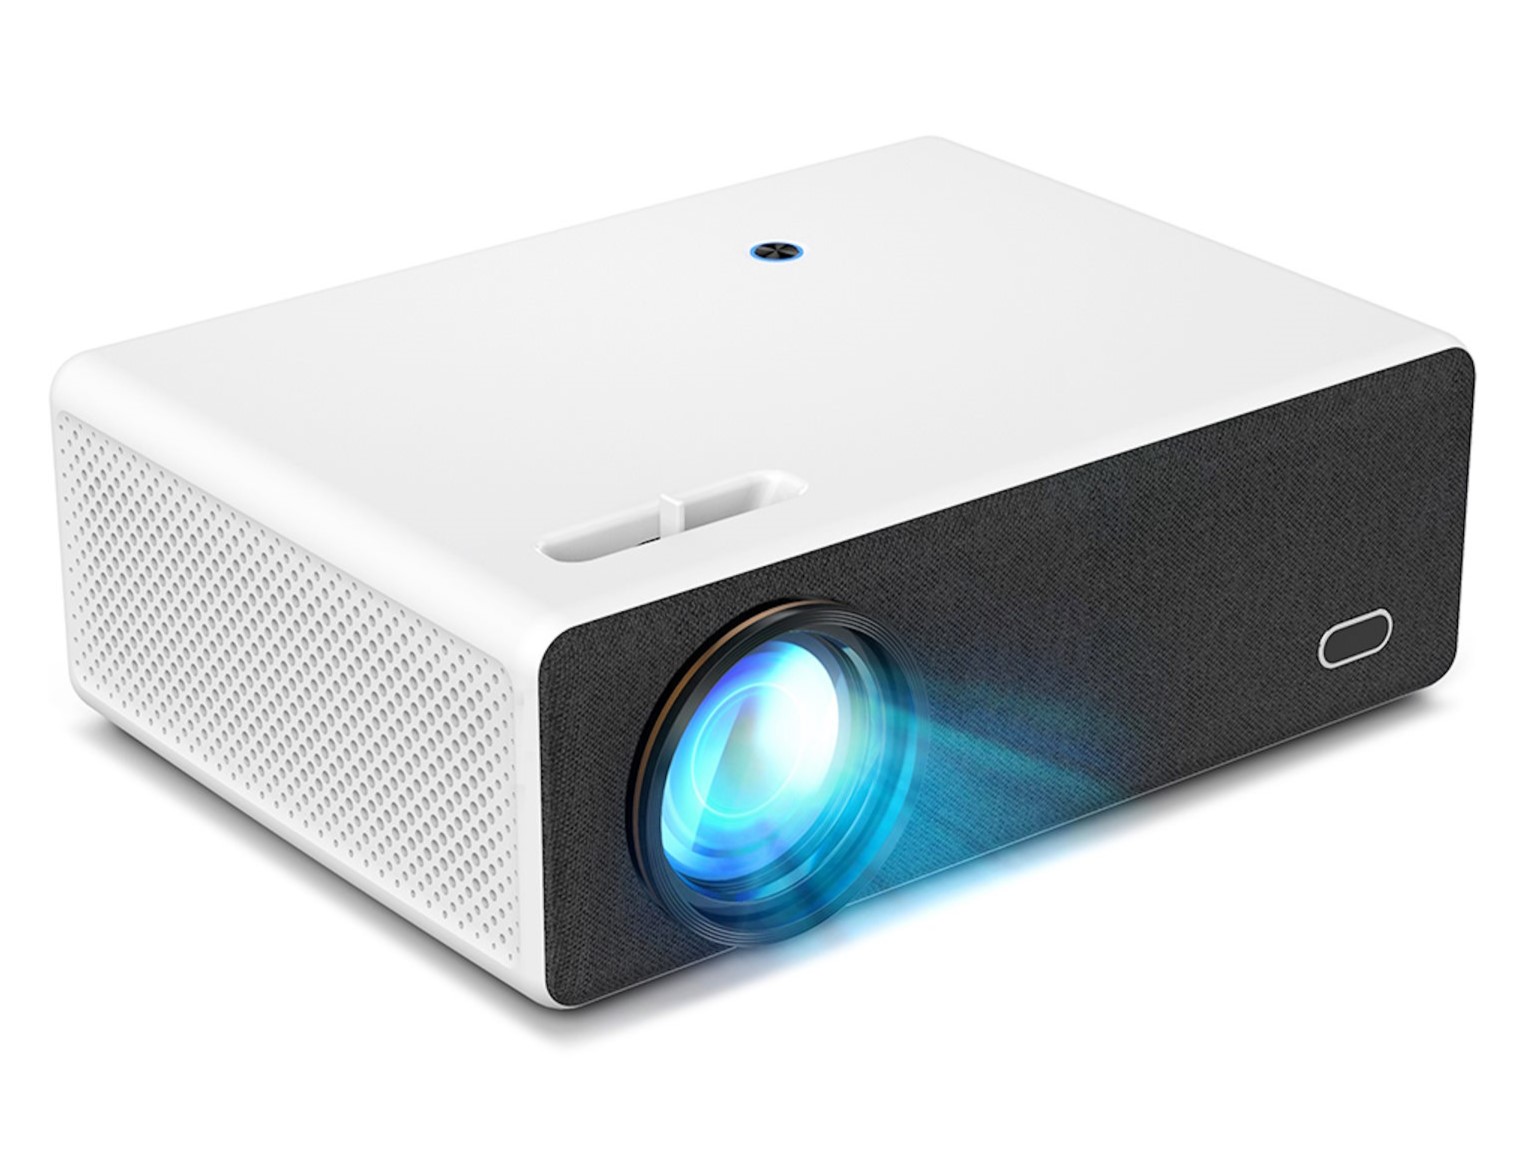 Wanbo Mozart 1 Pro projector from Xiaomi ecosystem now available globally -   News